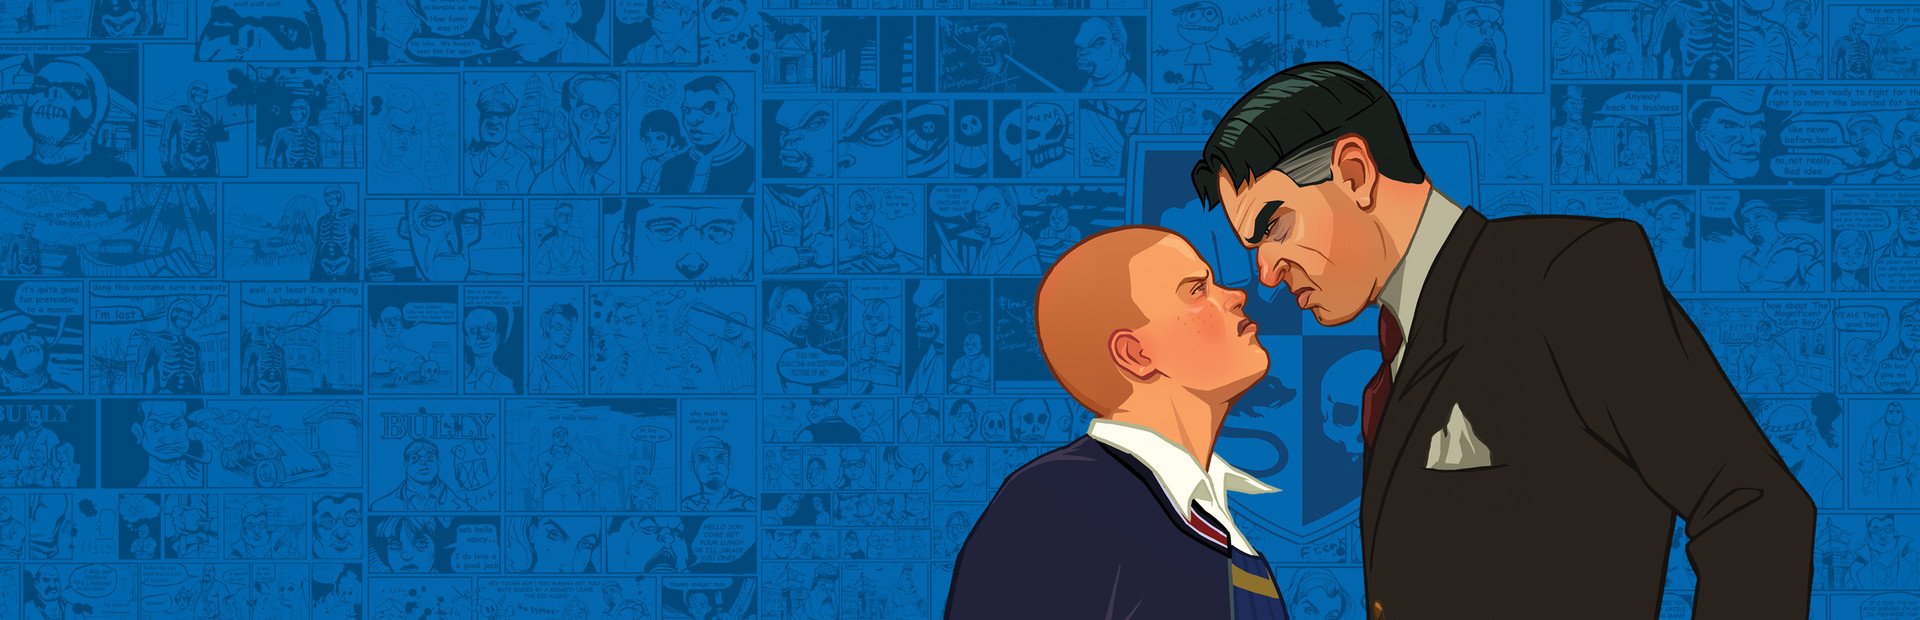 Bully: Anniversary Edition - SteamGridDB